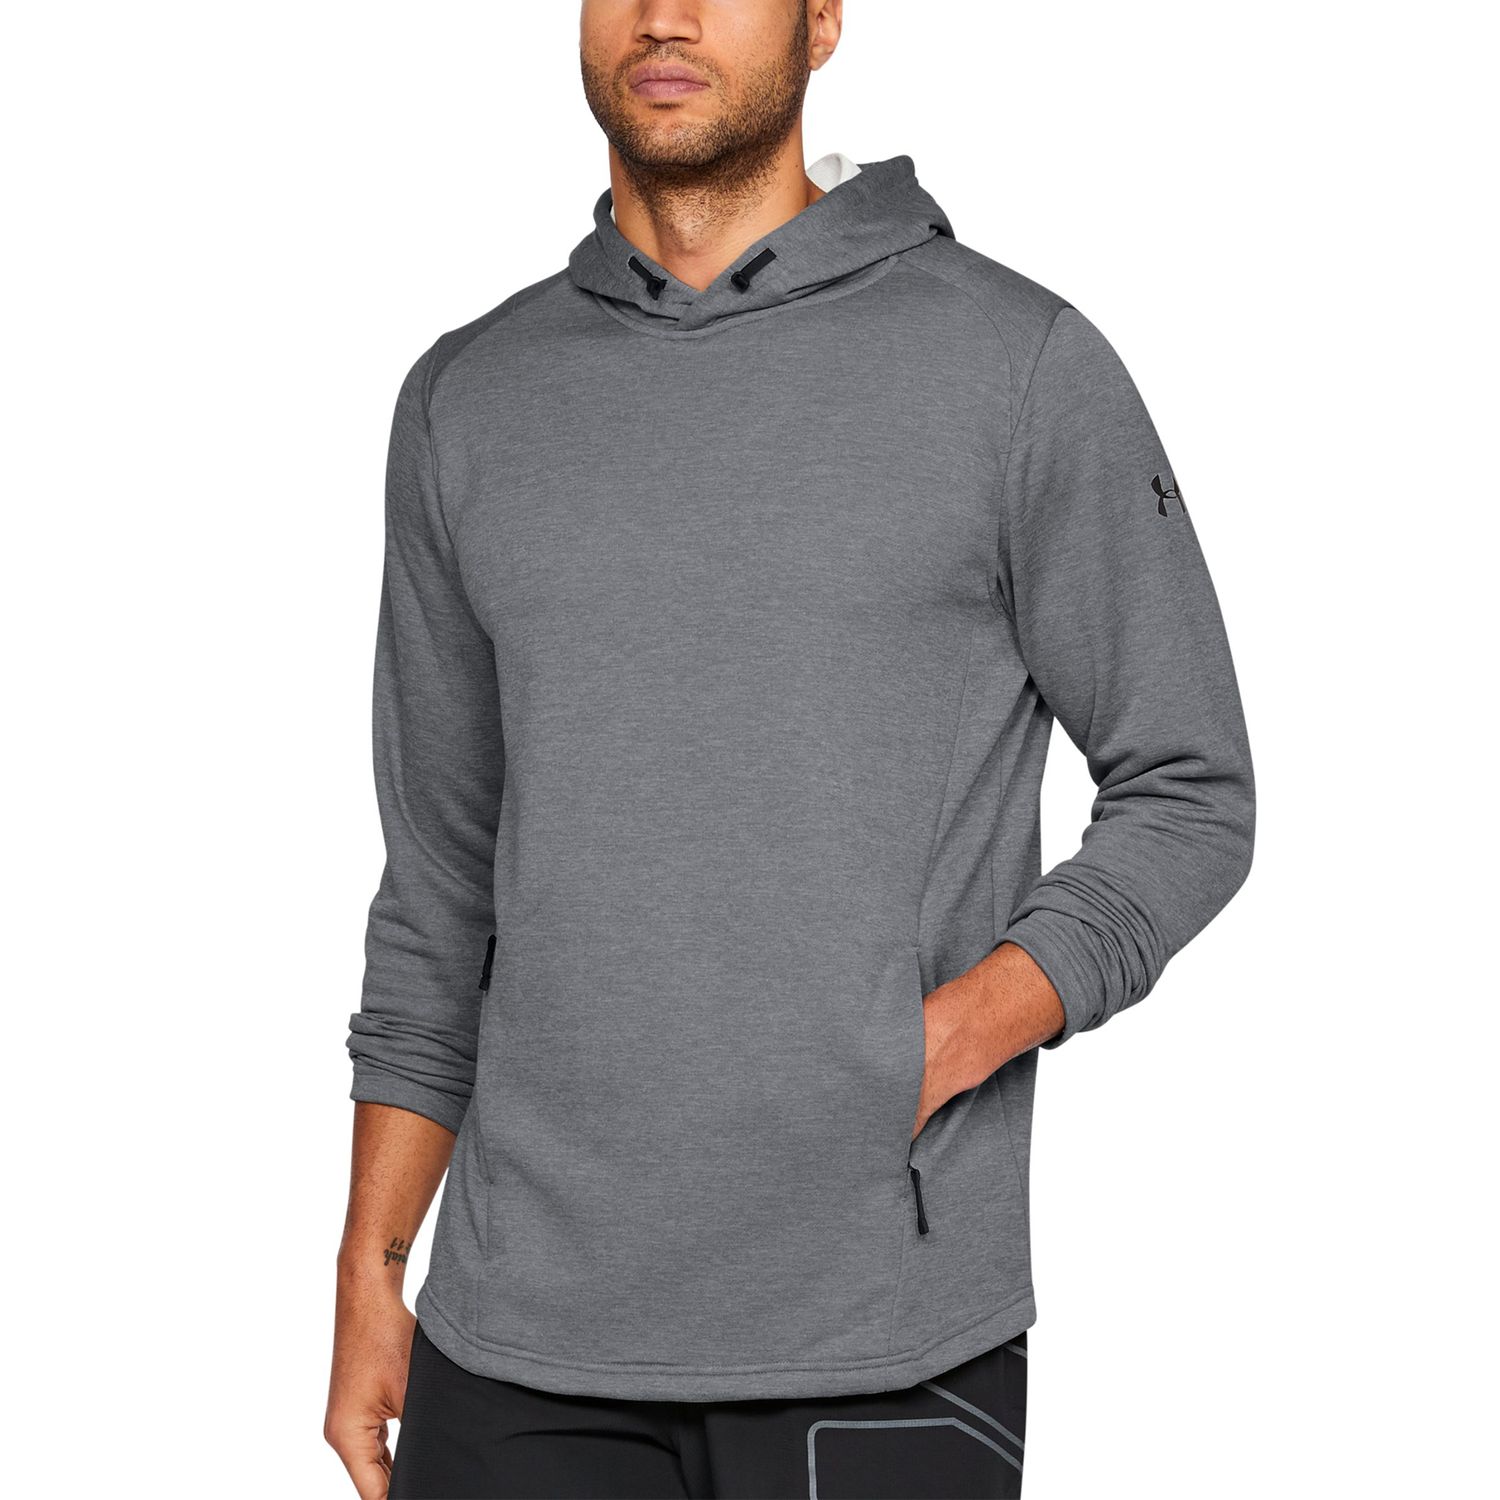 Men's Under Armour French Terry Tech Hoodie